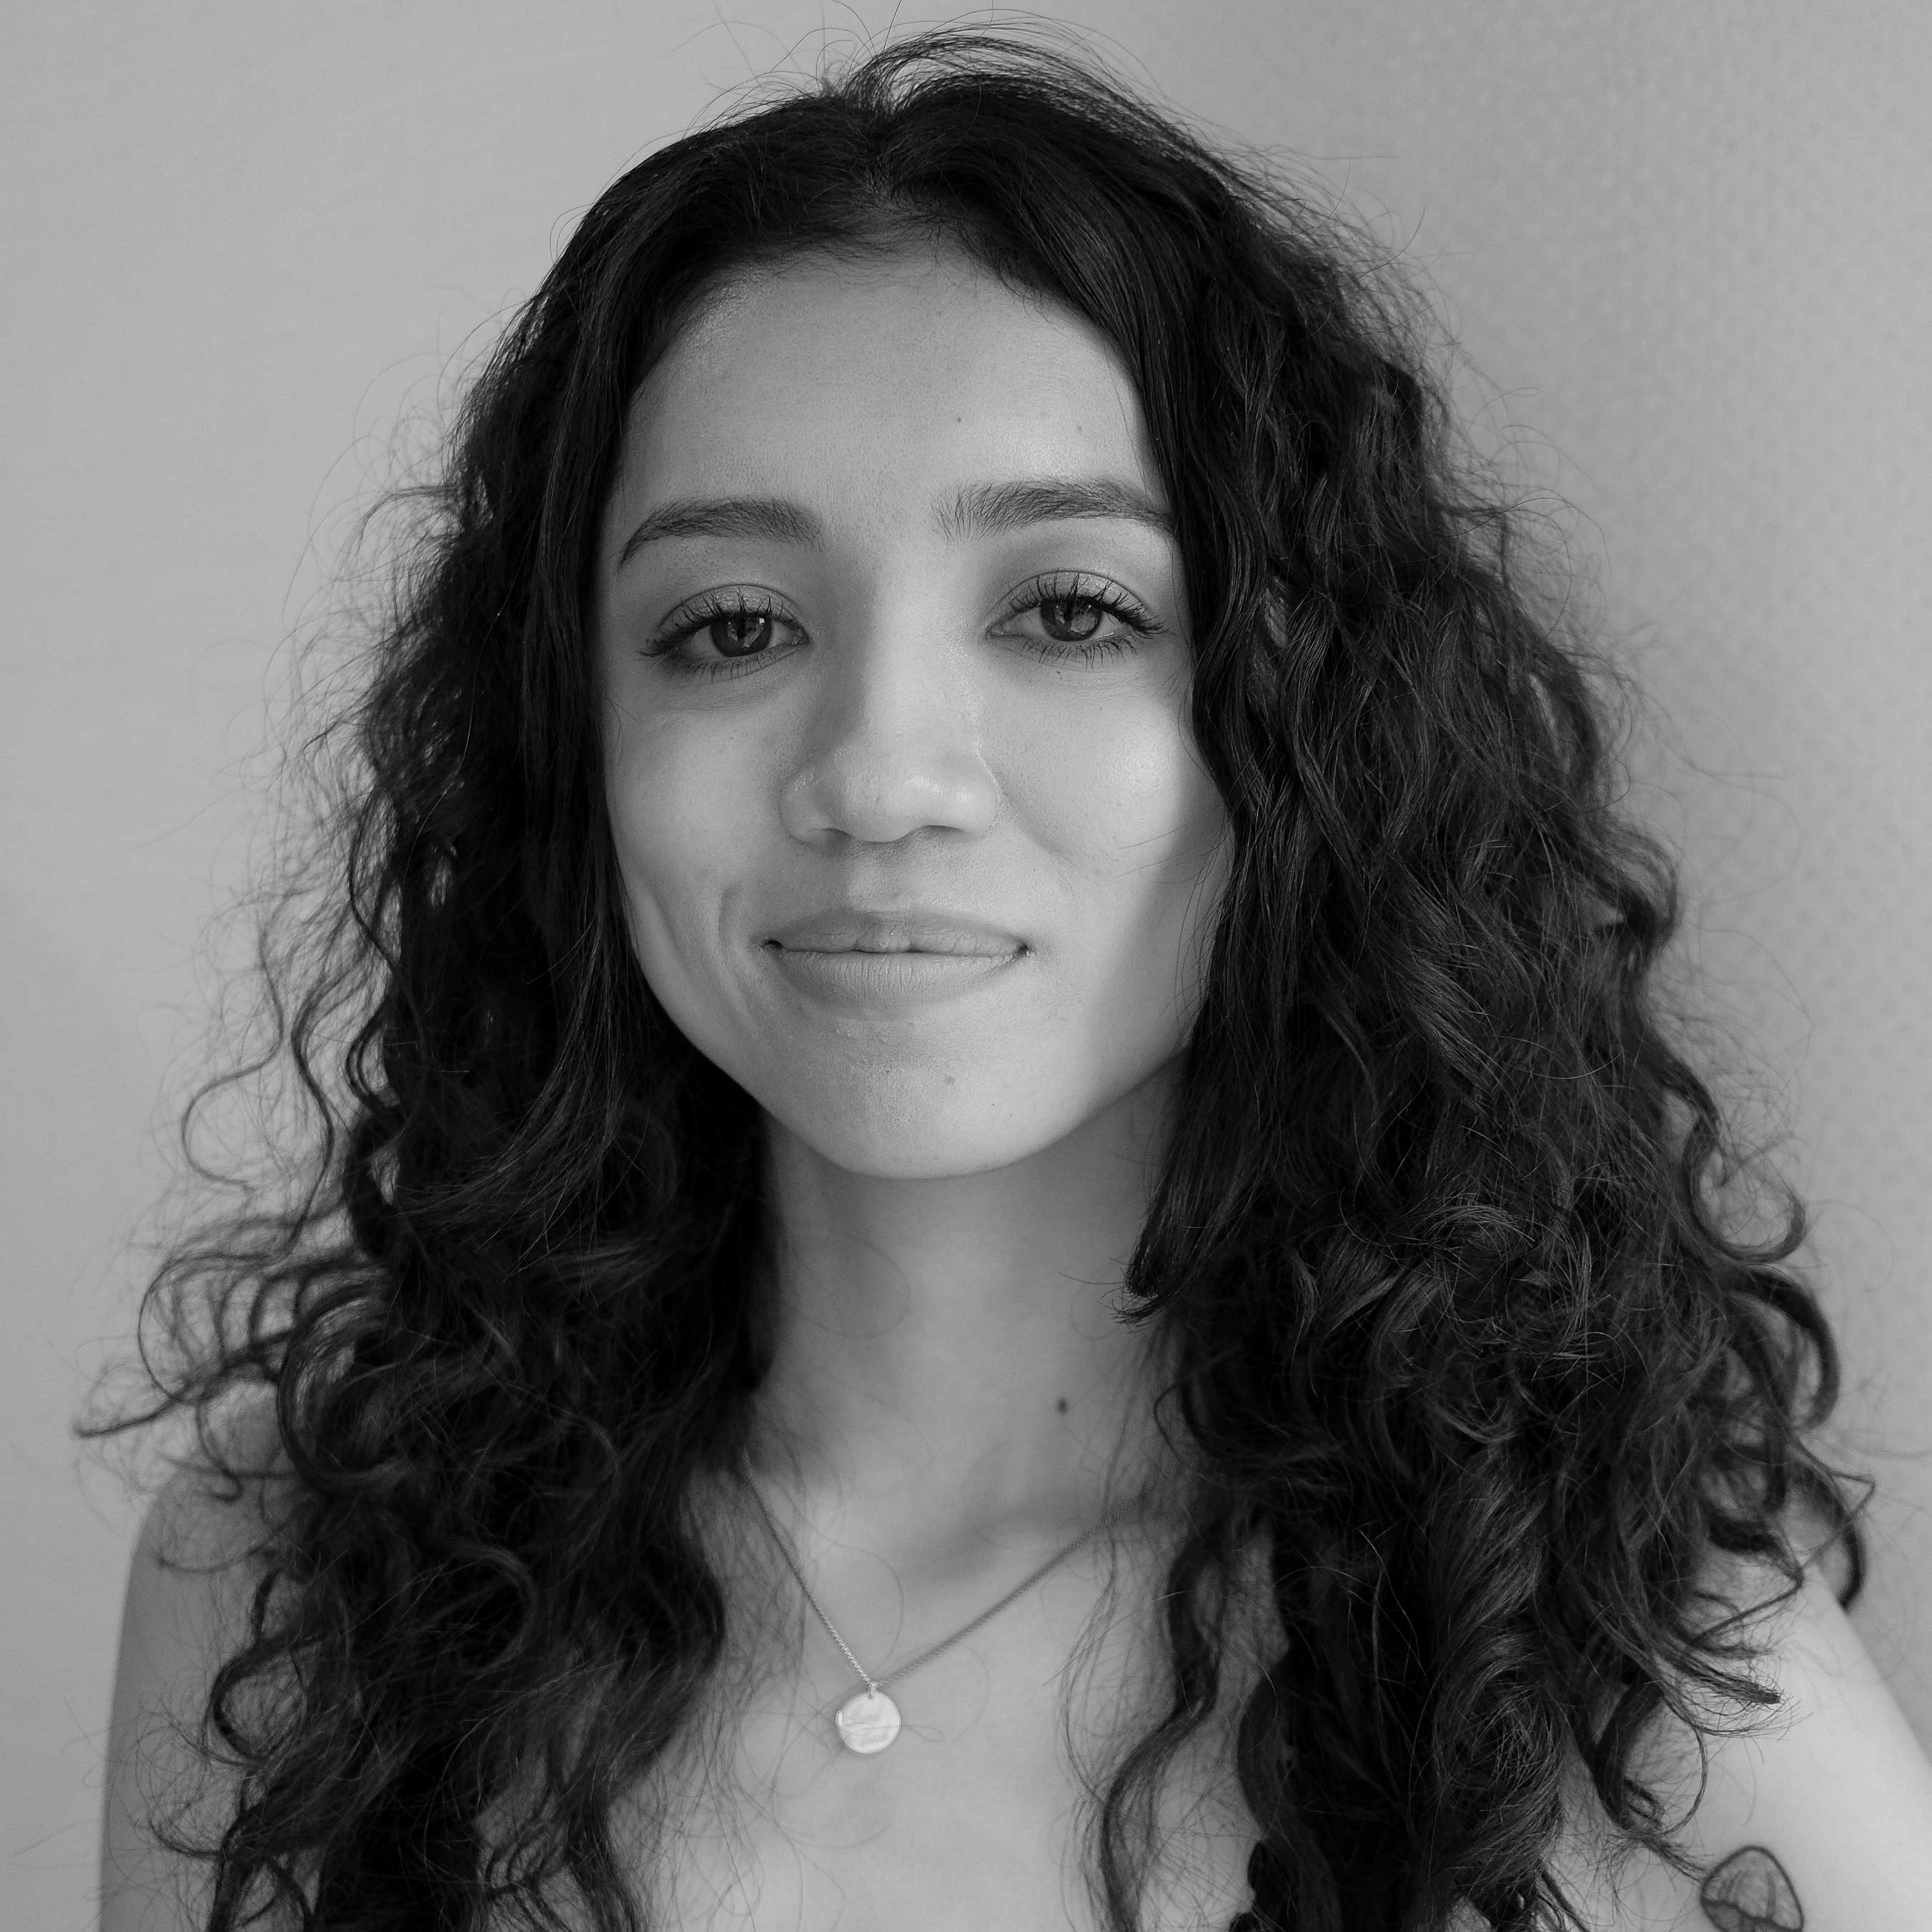 Black and white portrait of Mia Foster, sporting a soft smile and curly hair.